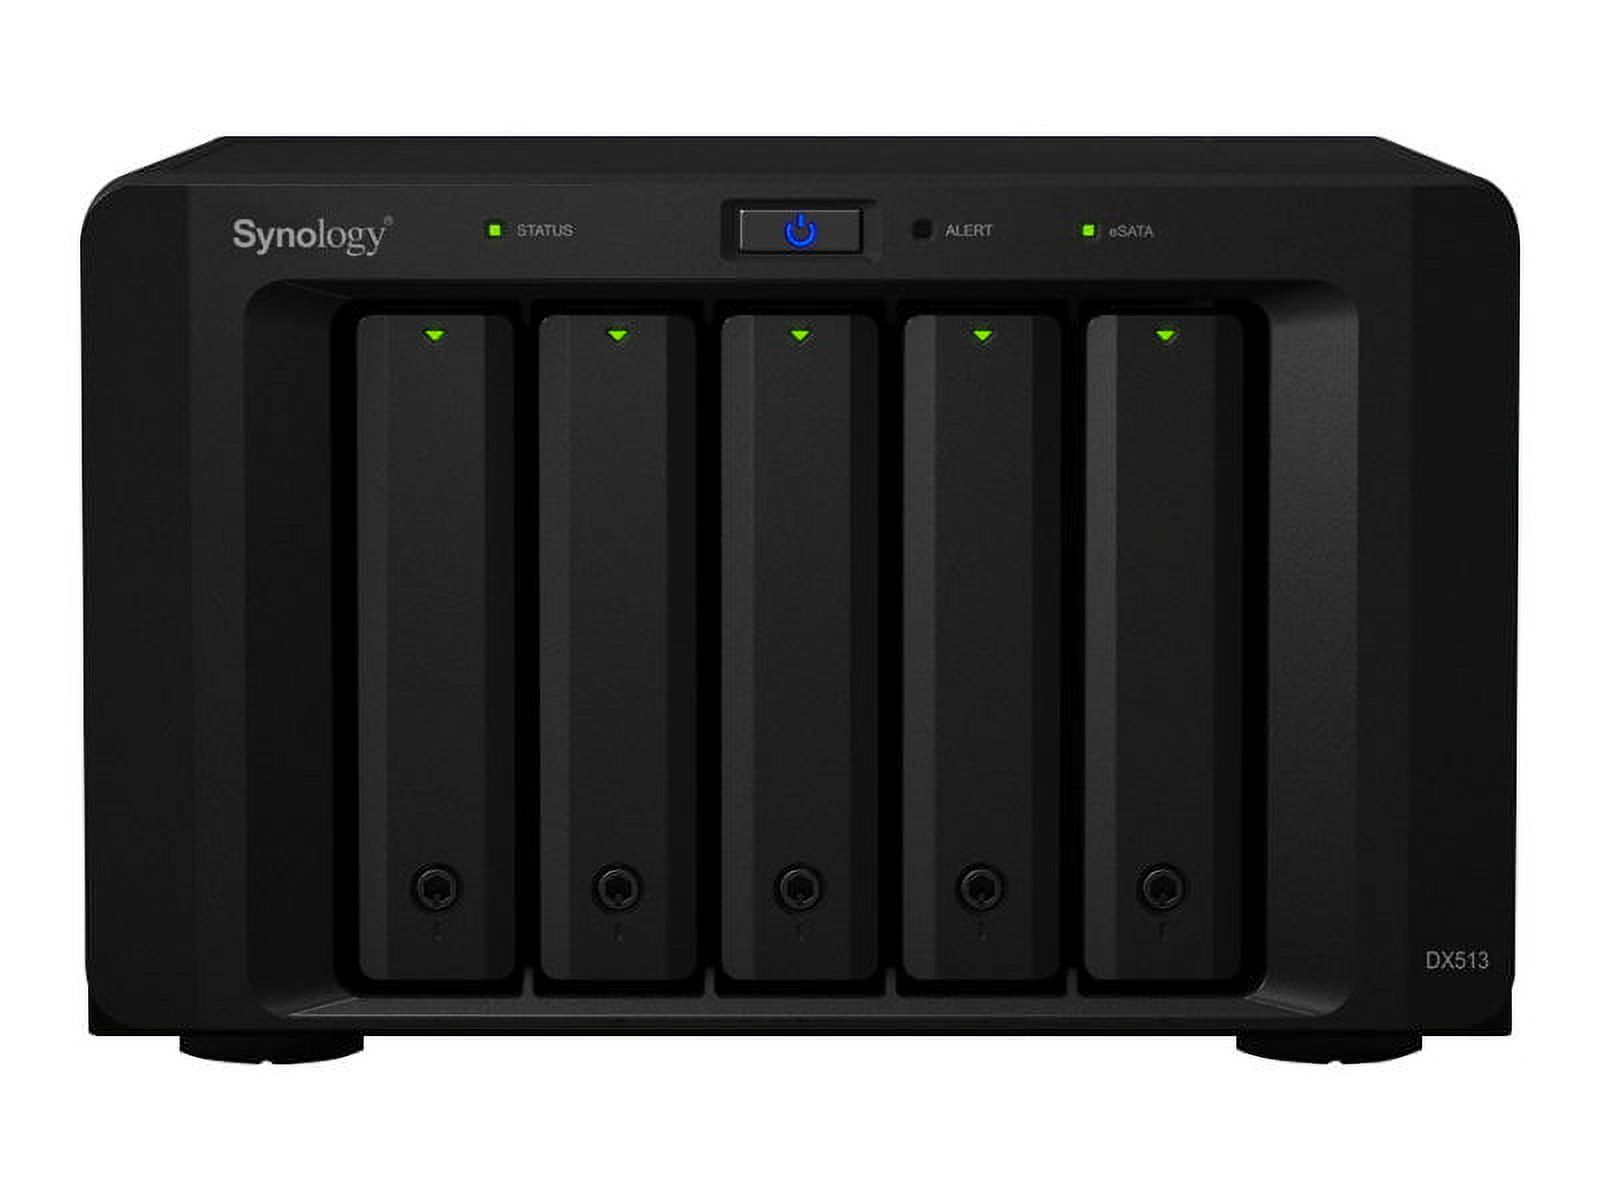 Synology DX513 Expansion Unit For Increasing Capacity of The Synology DiskStation - image 2 of 4